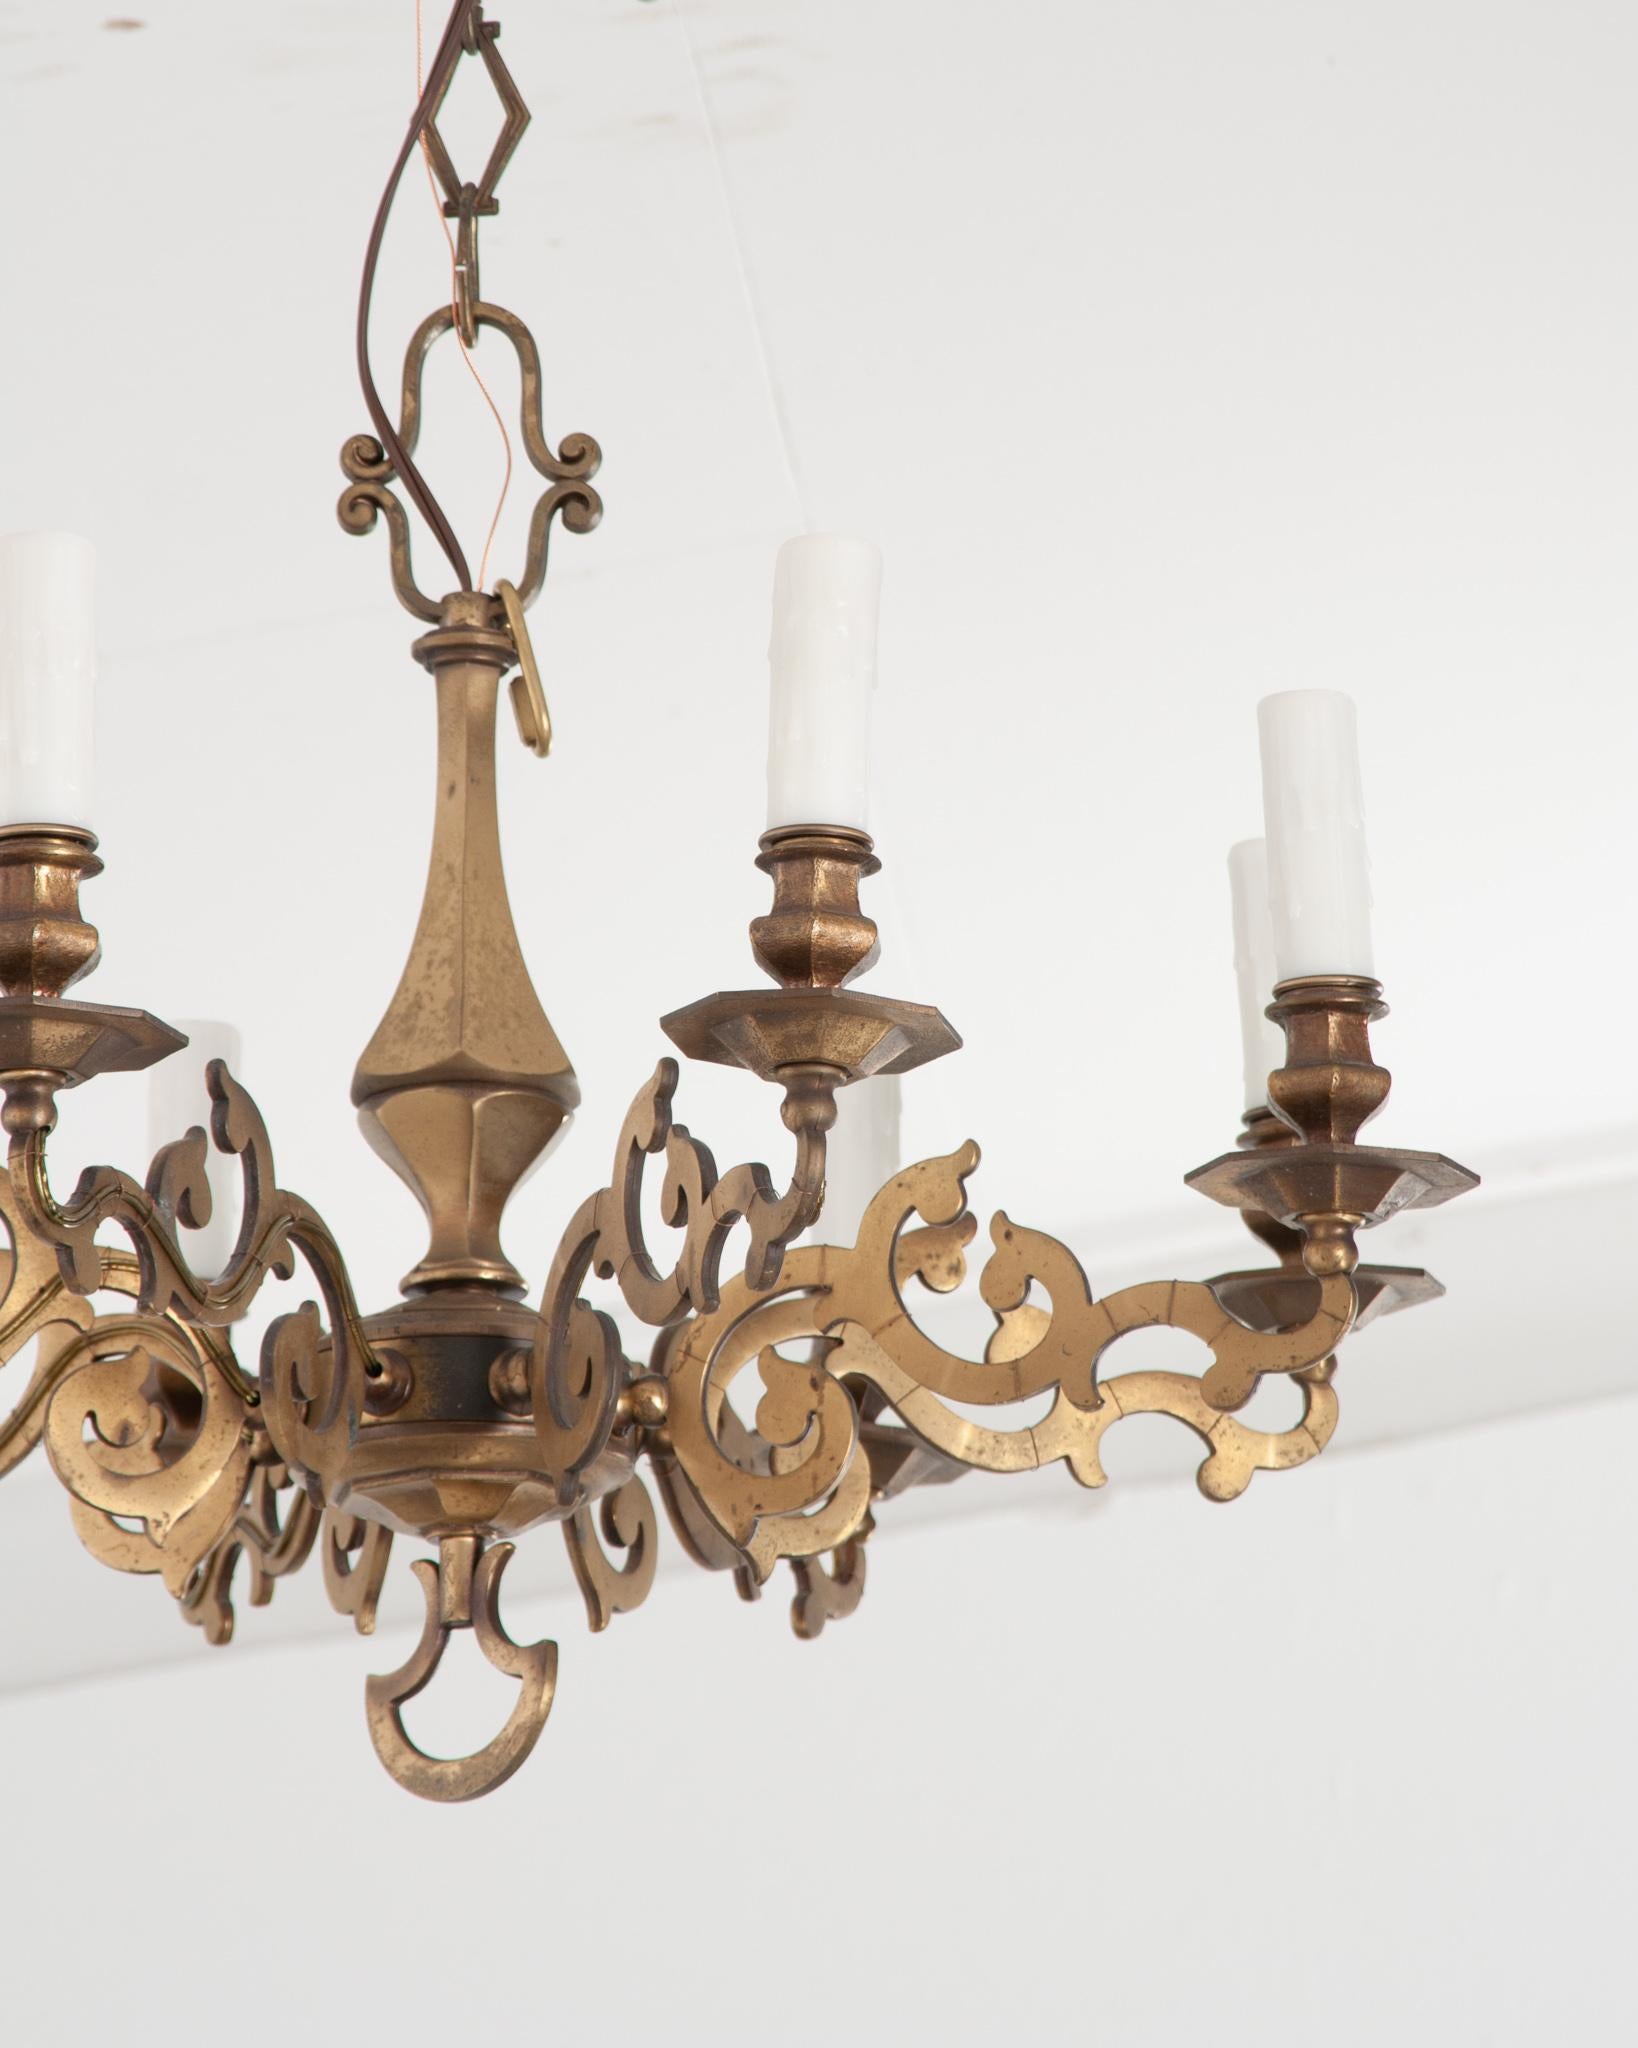 French 19th Century Brass Chandelier In Good Condition For Sale In Baton Rouge, LA